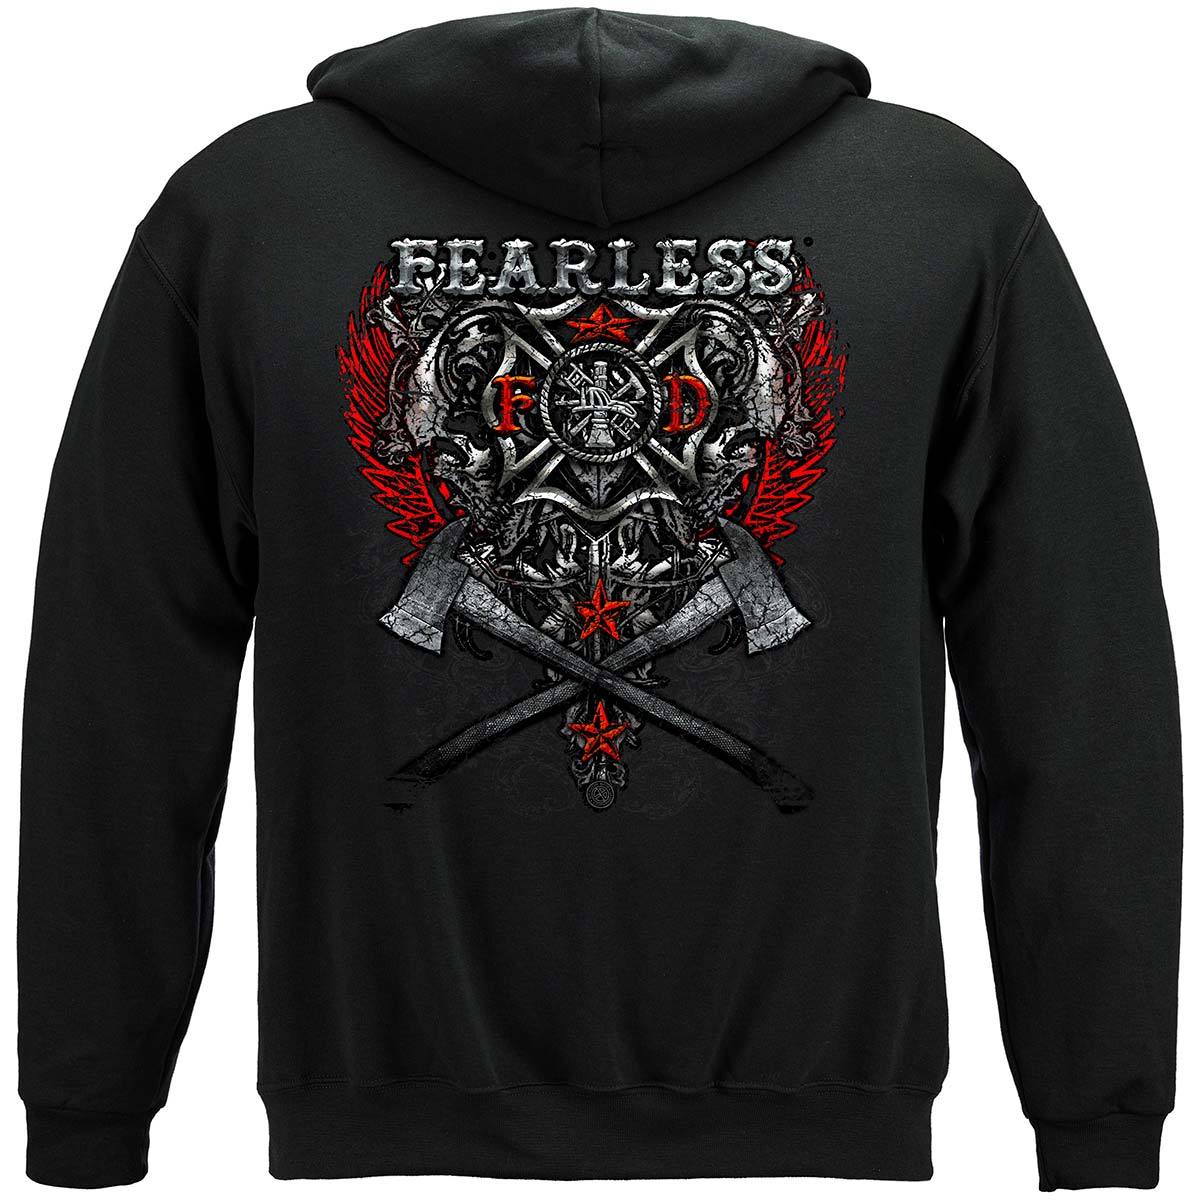 Firefighter Fearless Silver Foil Premium Long Sleeves